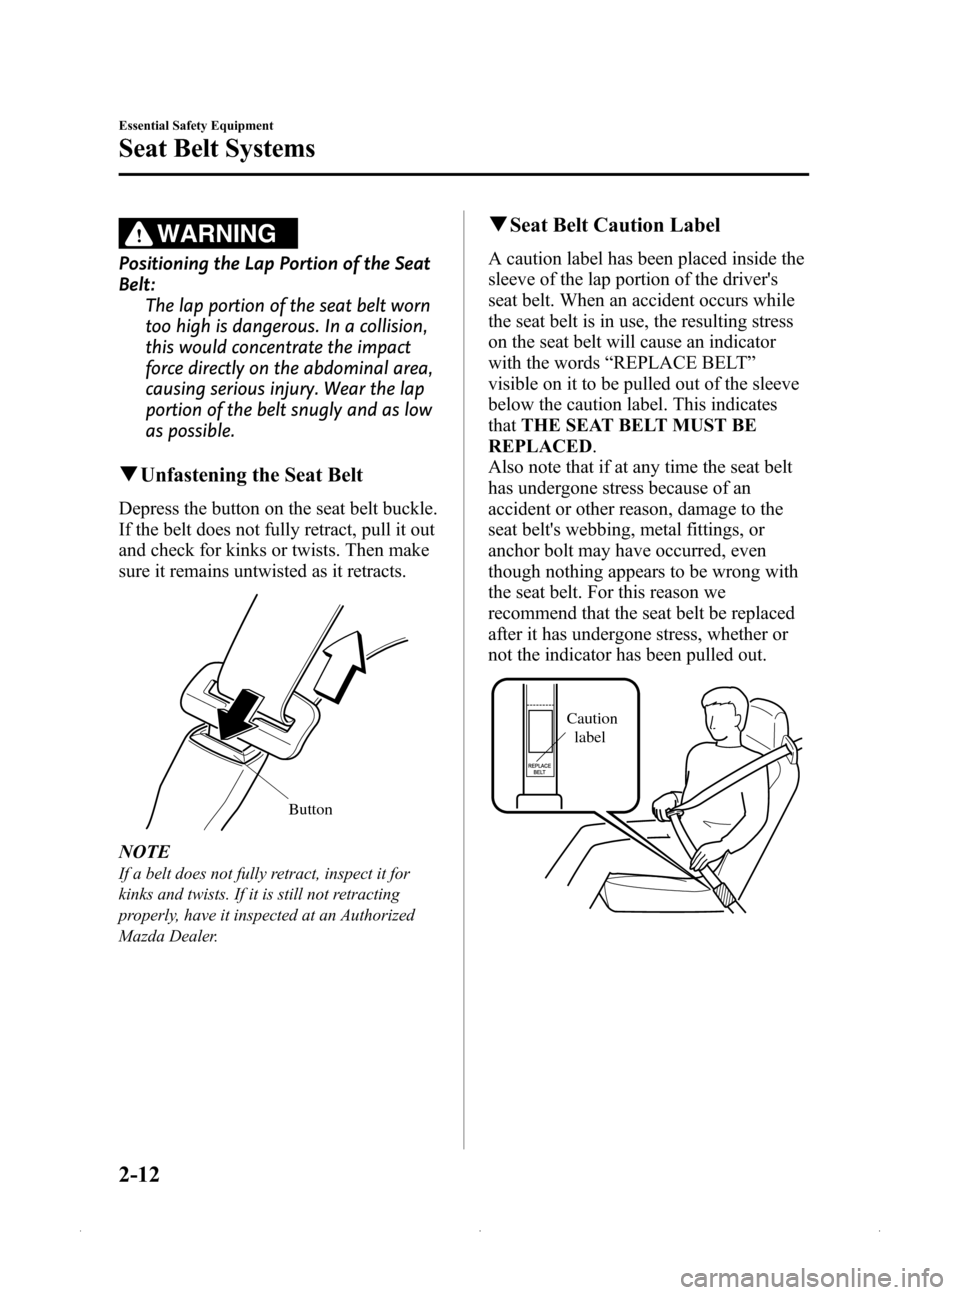 MAZDA MODEL MX-5 PRHT 2015   (in English) Owners Manual Black plate (24,1)
WARNING
Positioning the Lap Portion of the Seat
Belt:The lap portion of the seat belt worn
too high is dangerous. In a collision,
this would concentrate the impact
force directly on